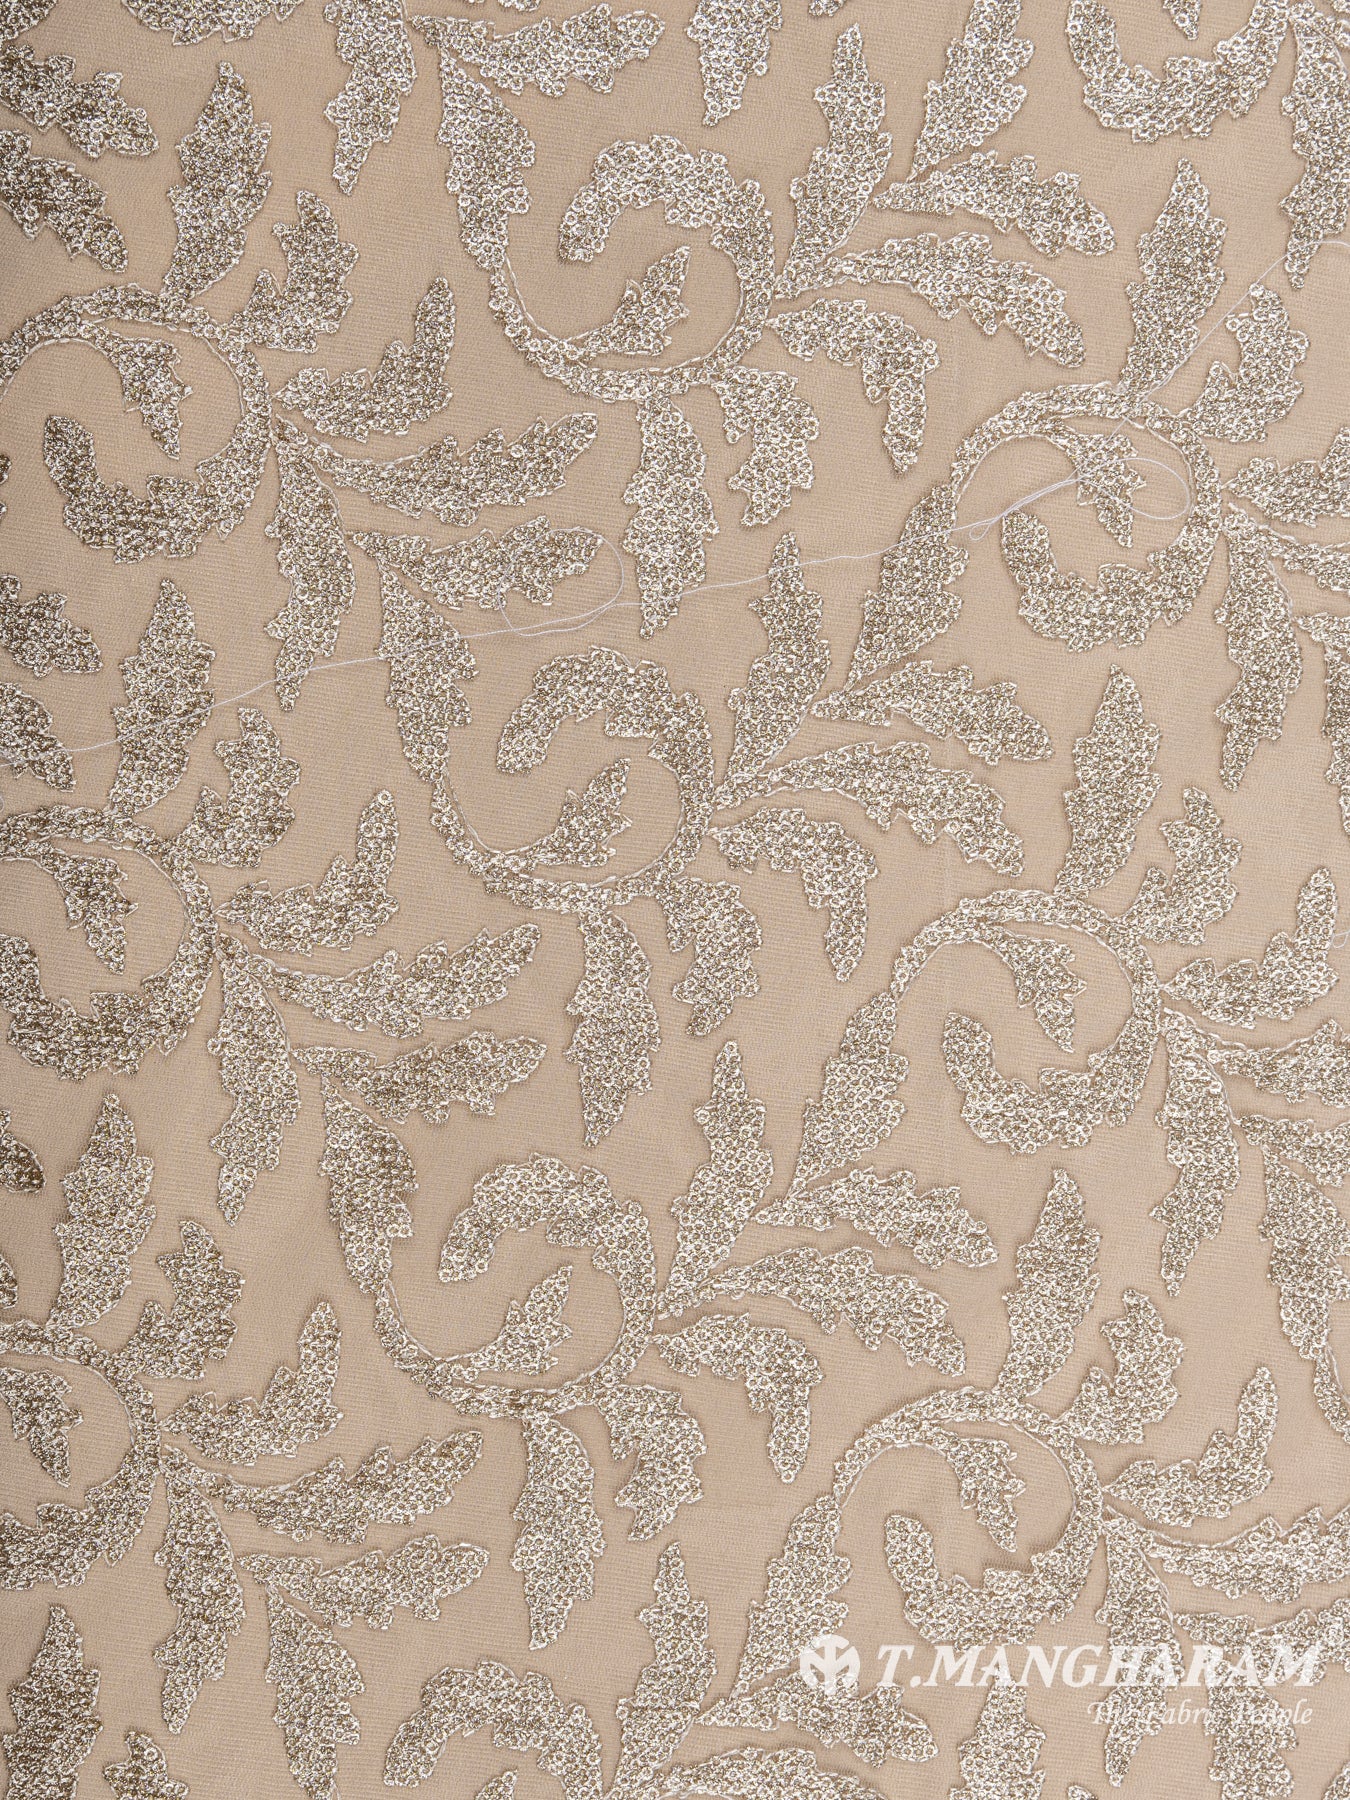 Beige Net Embroidery Fabric - EC6332 view-3